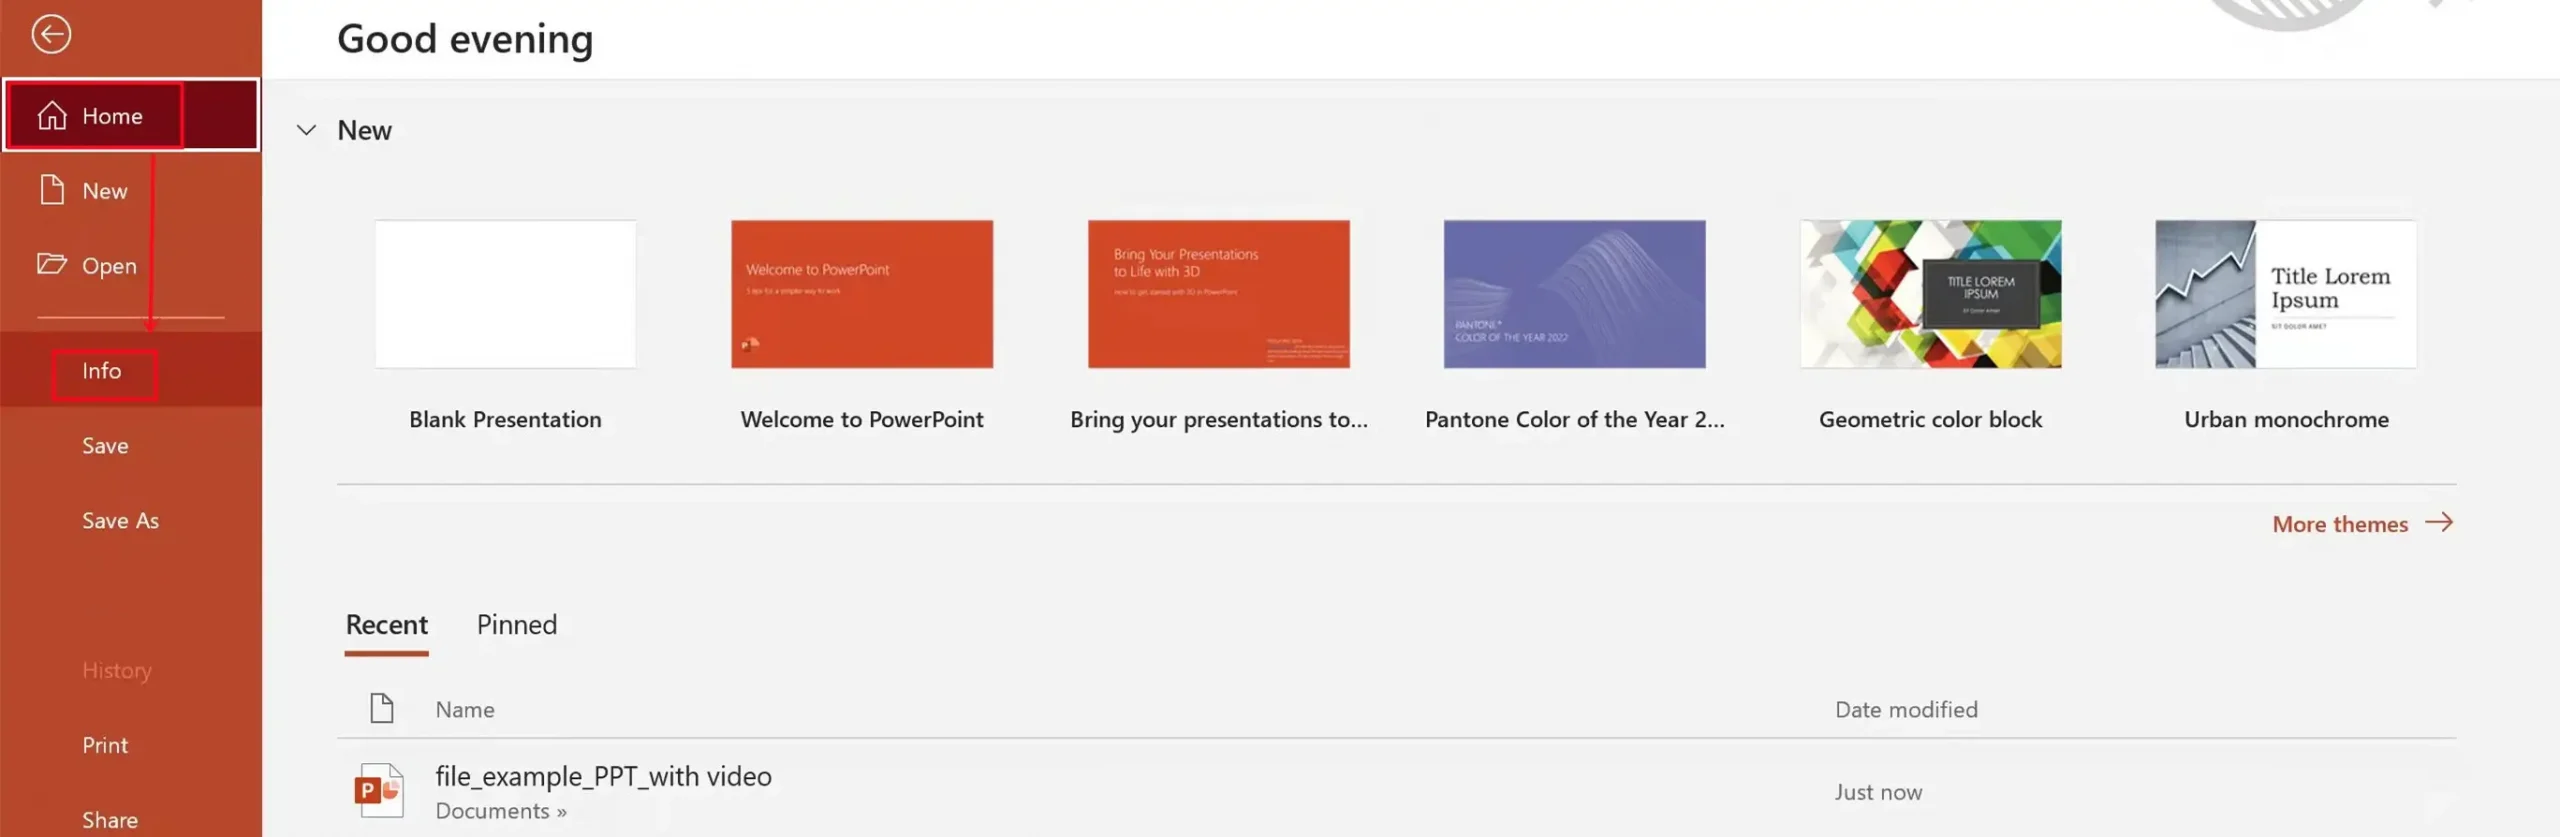 compress a video in powerpoint step 1